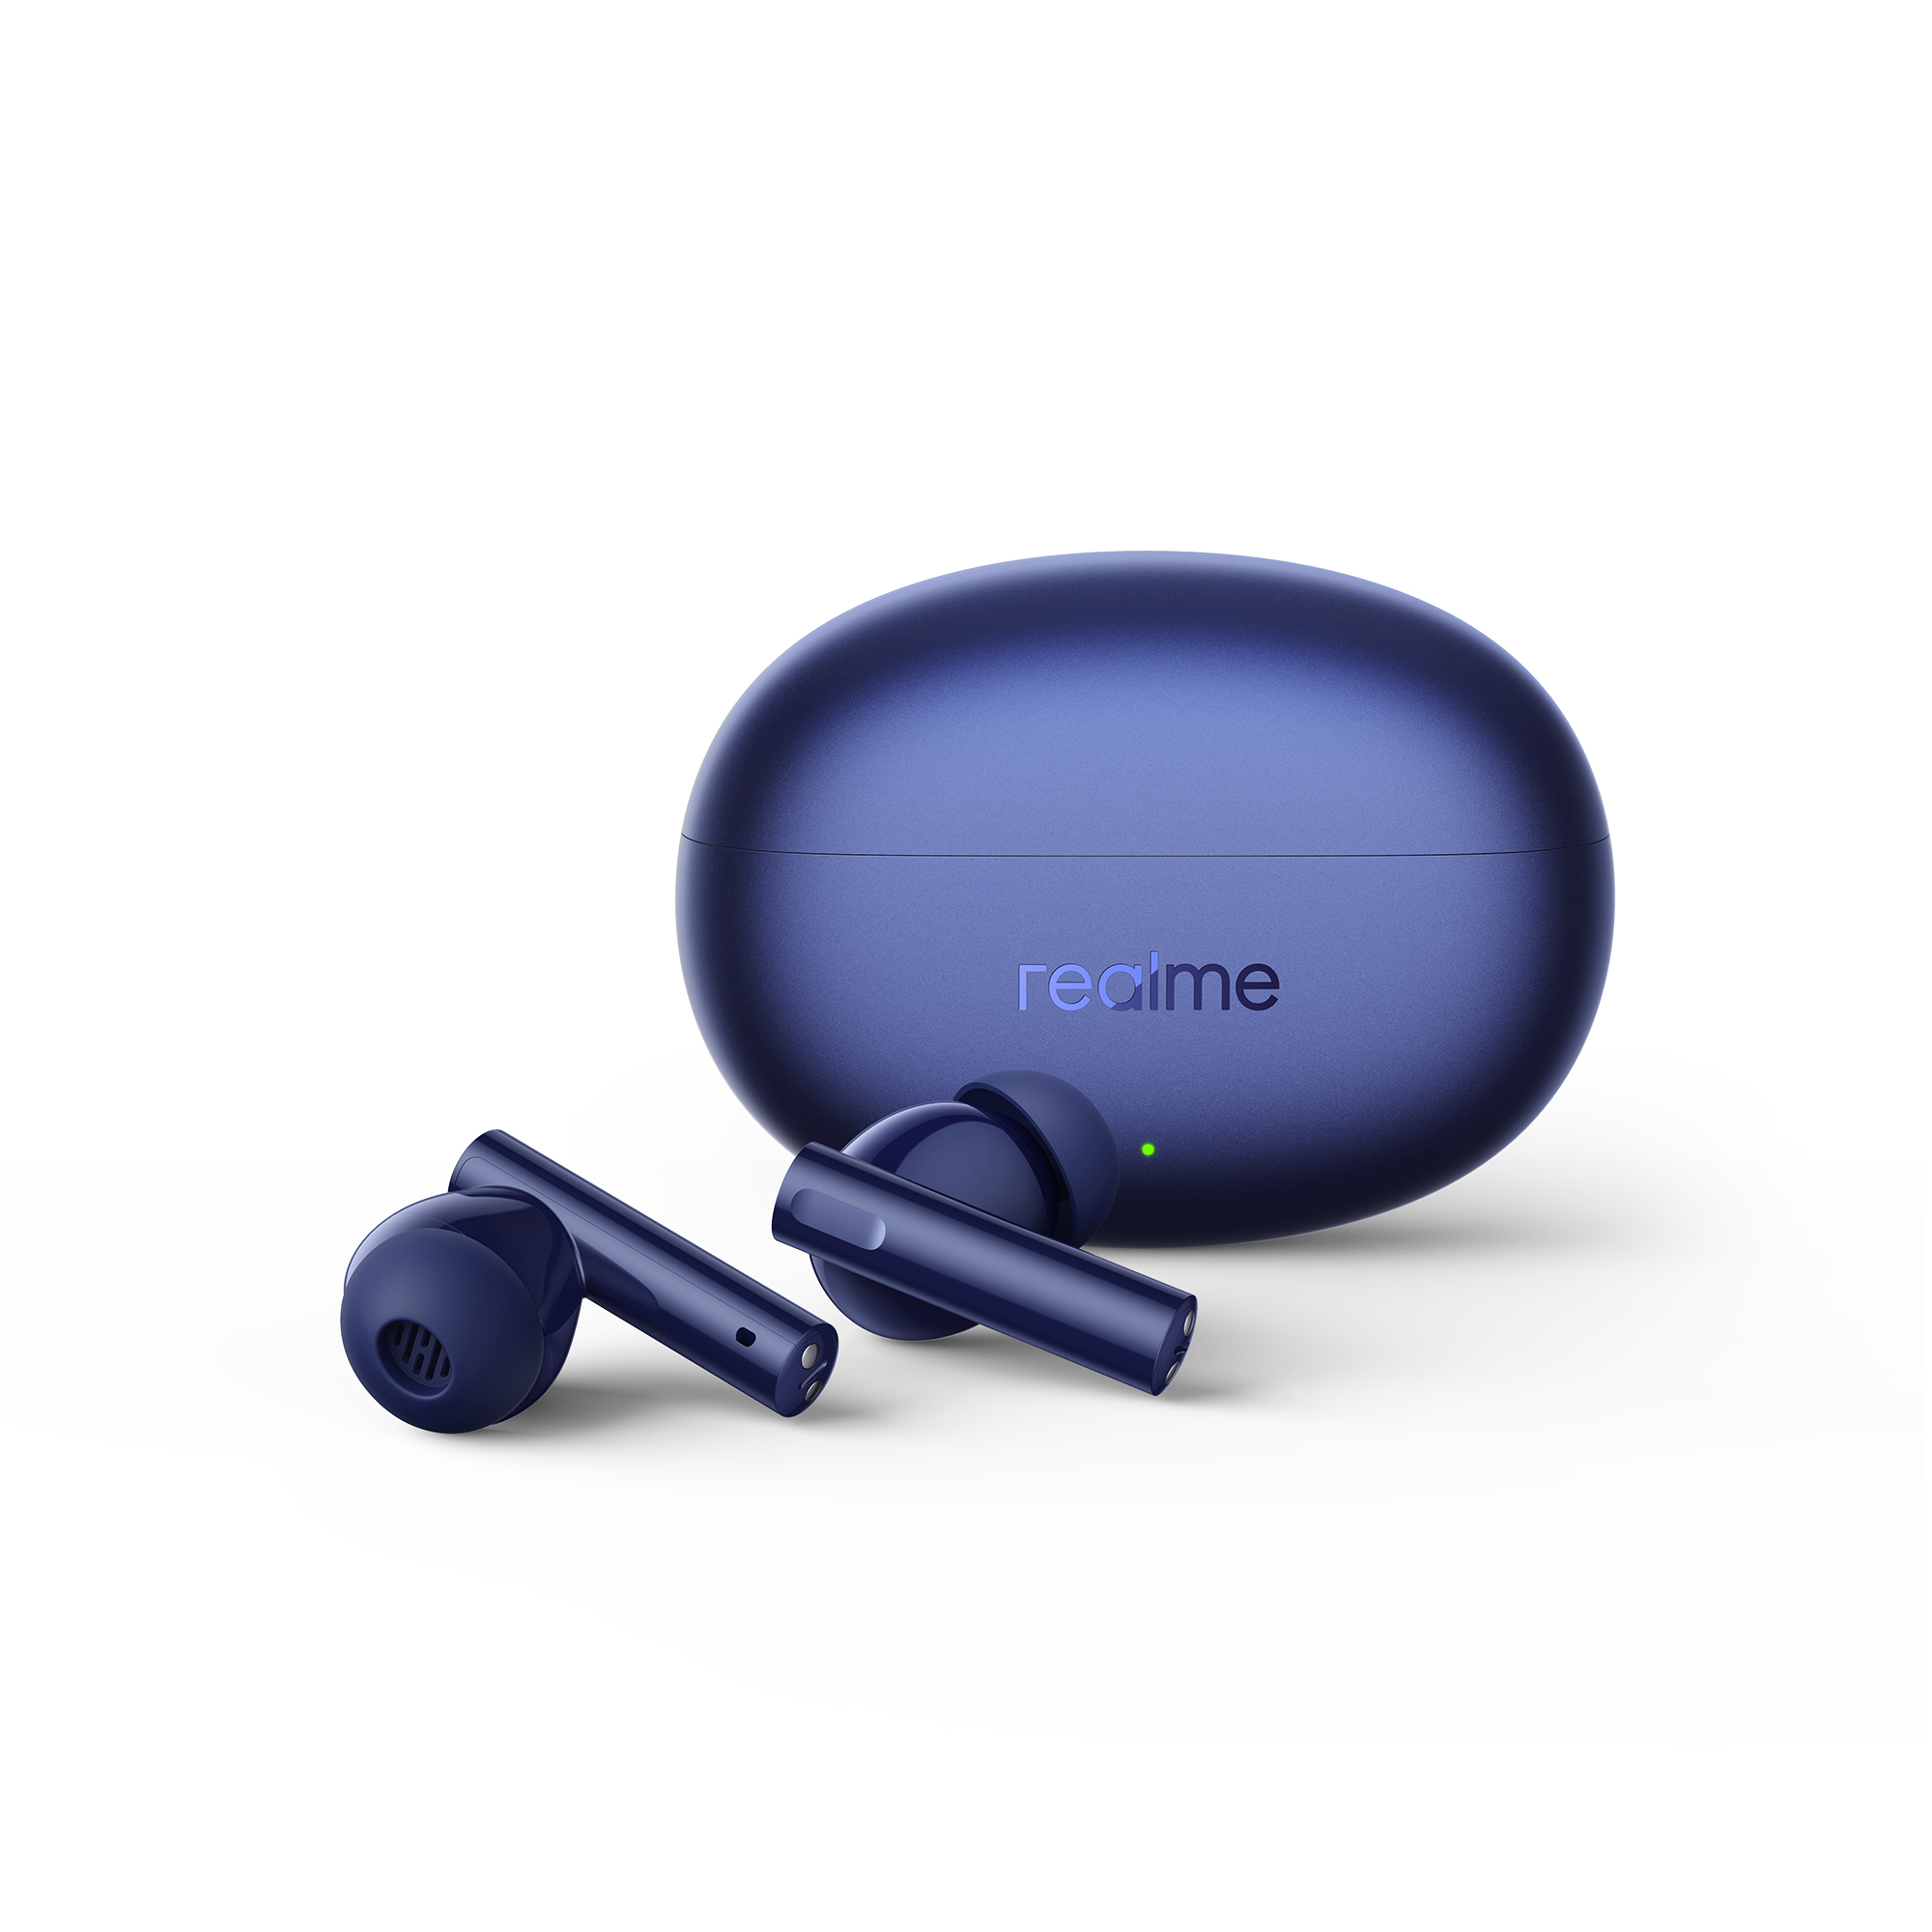 Realme Buds Air 5 Pro Earphones Set to Rock India! - Cashify